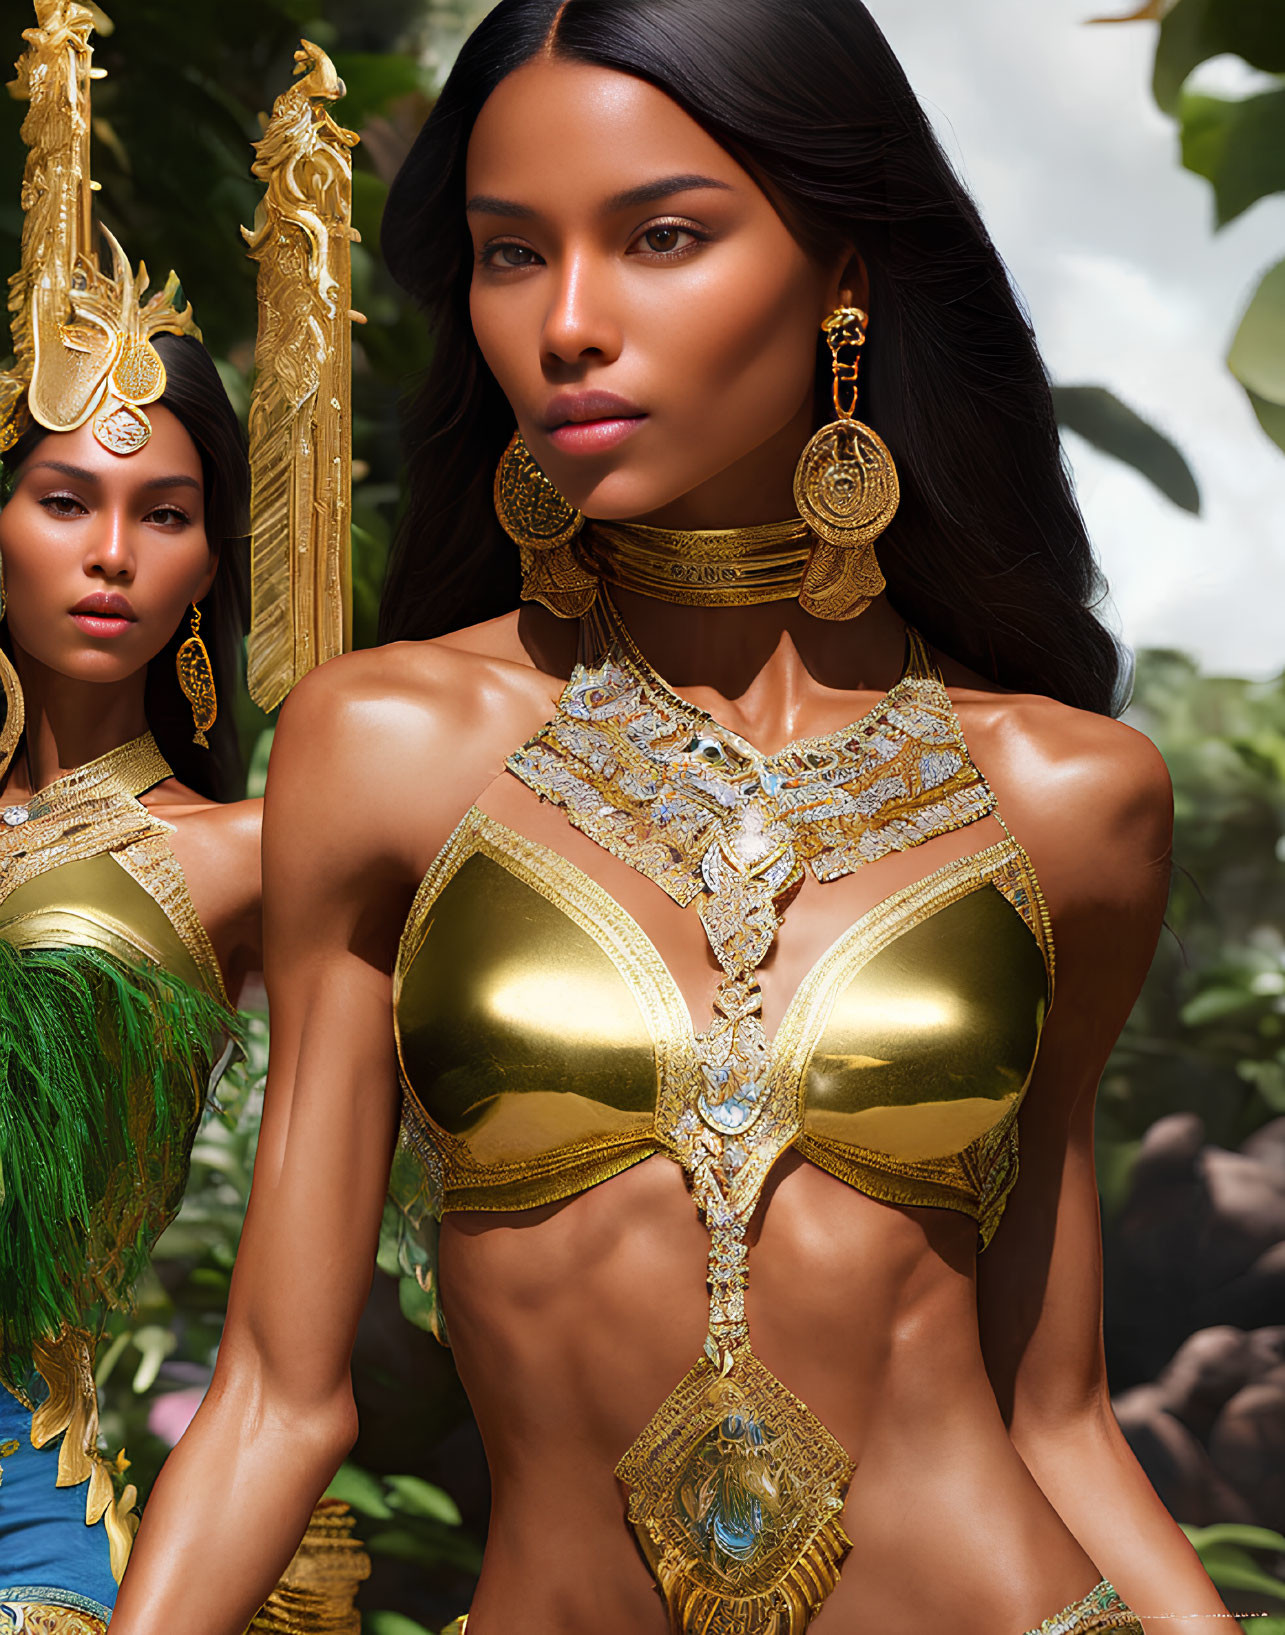 Luxurious gold-themed attire and elaborate jewelry on a woman in a tropical setting